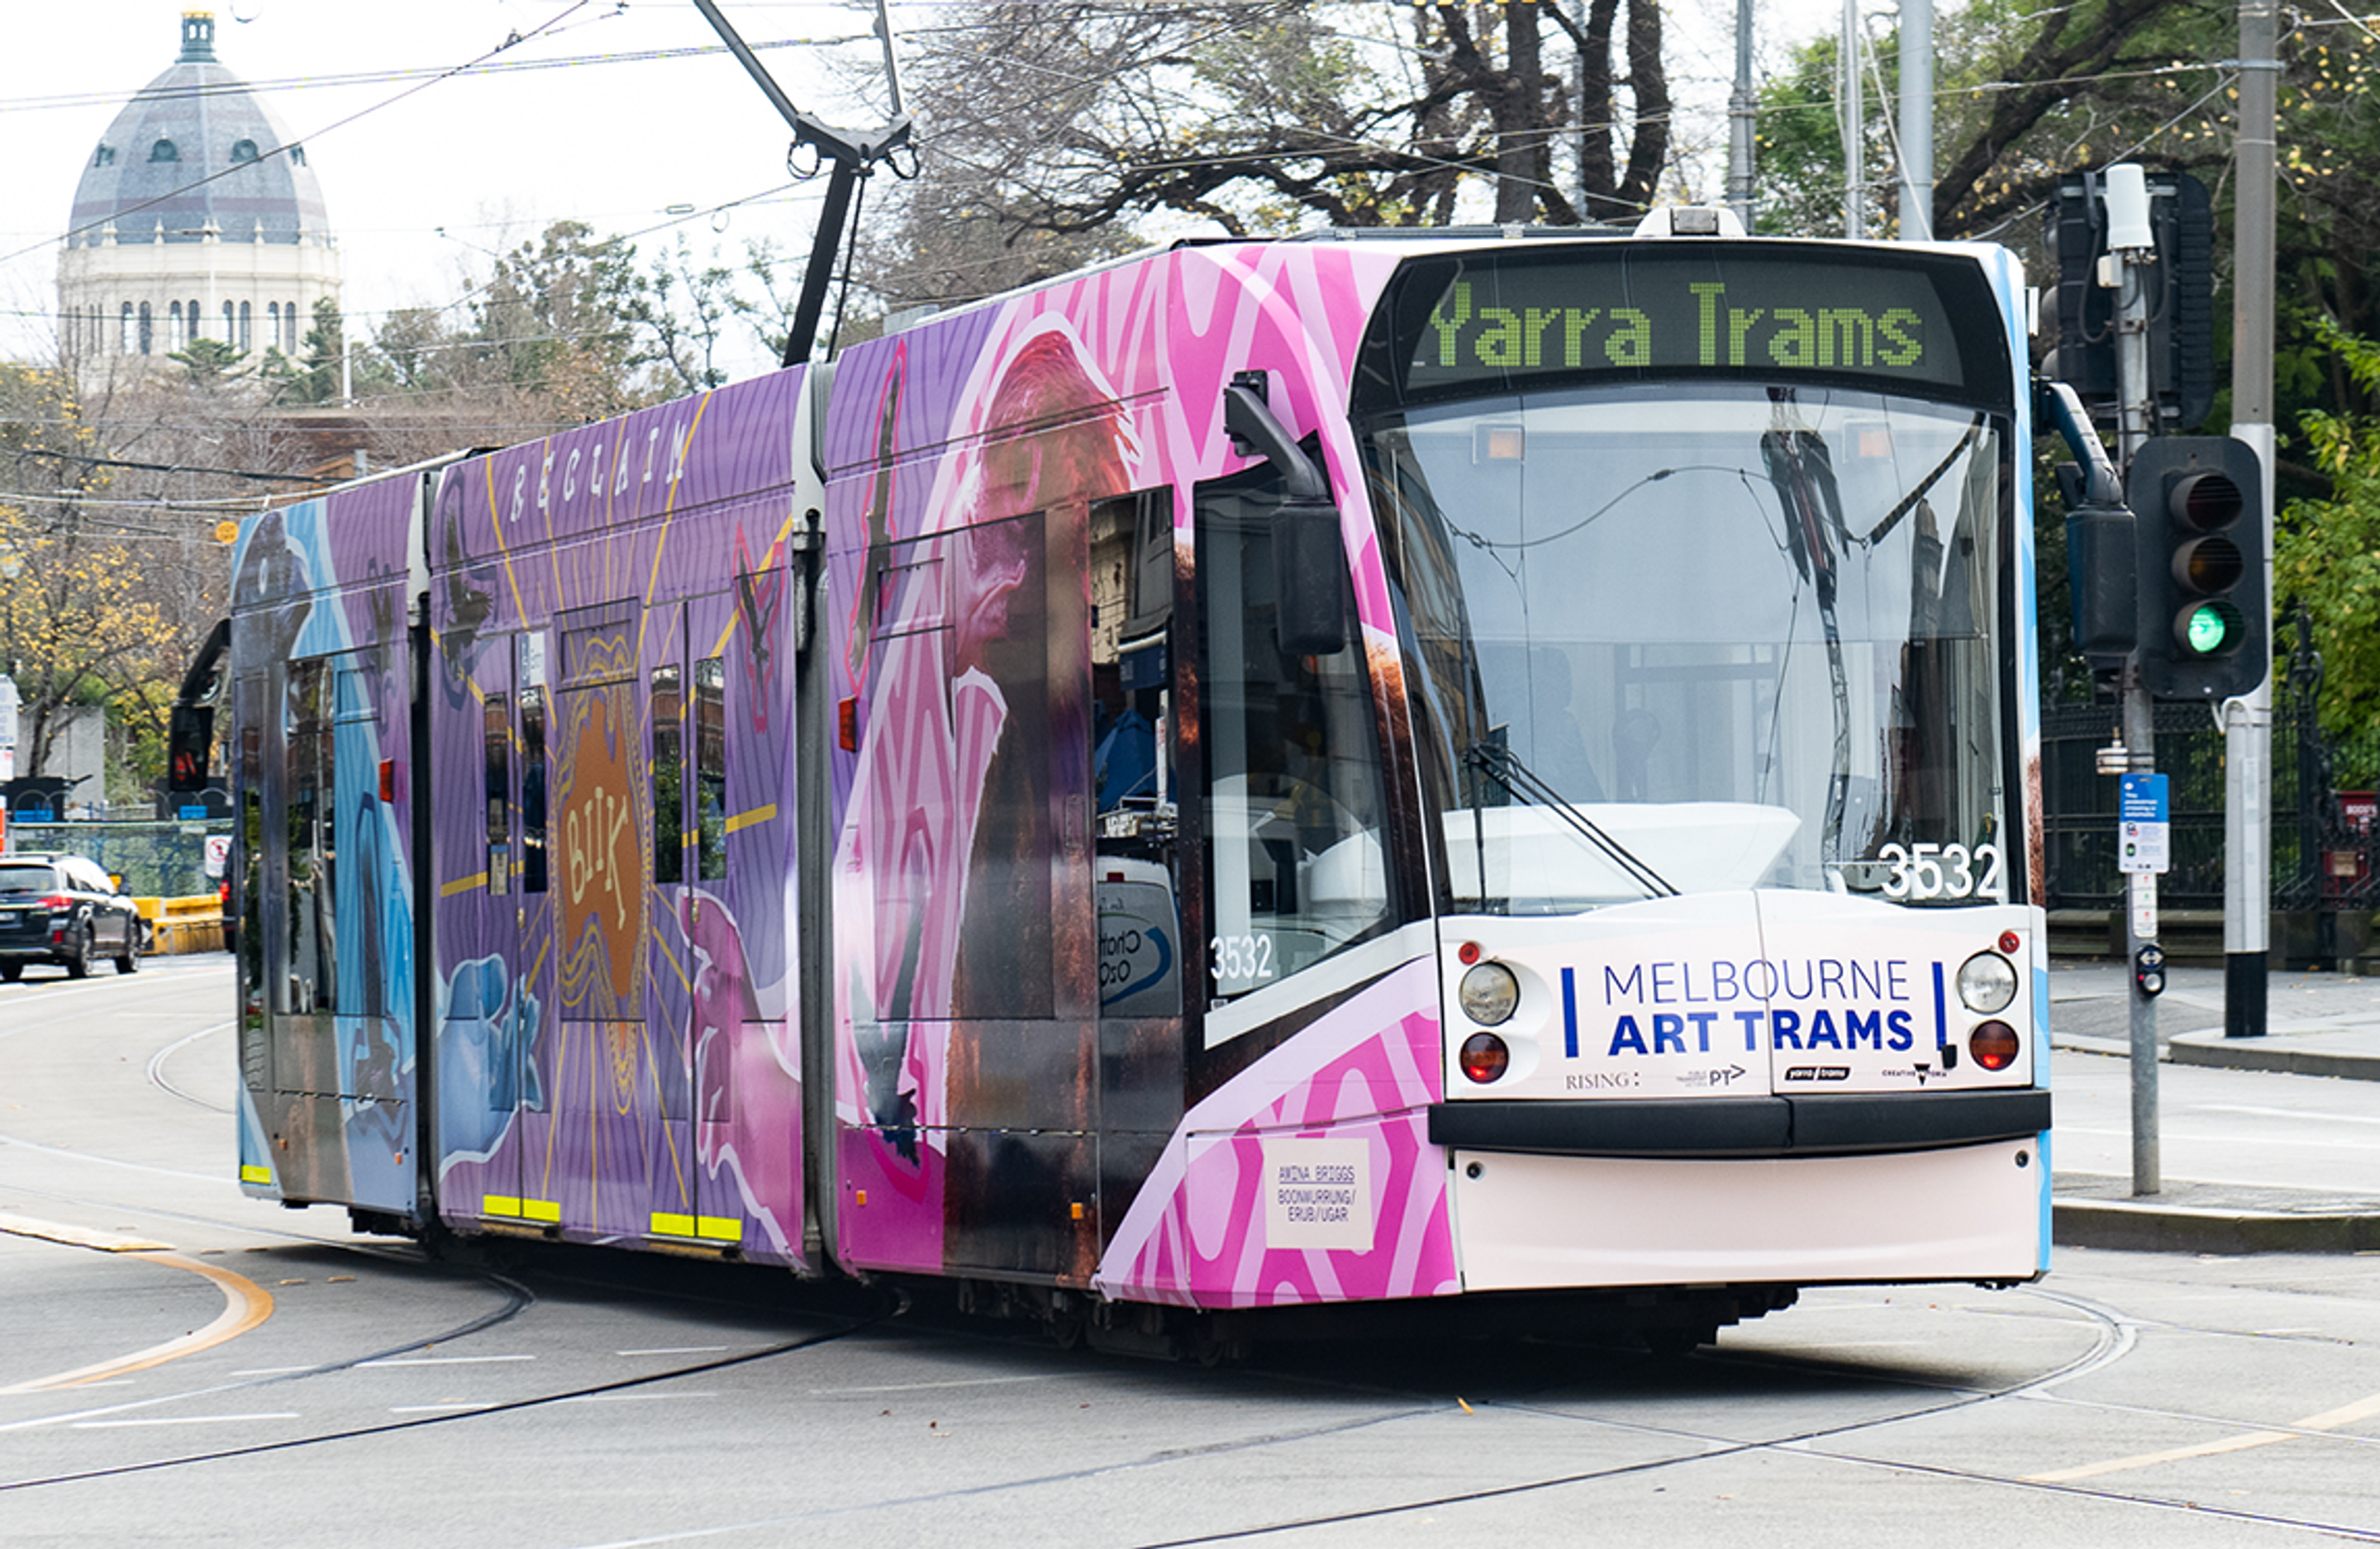 Amina Briggs' Art tram driving down Spring Street, alongside Parliament House Melbourne, with city buildings in the backdrop.